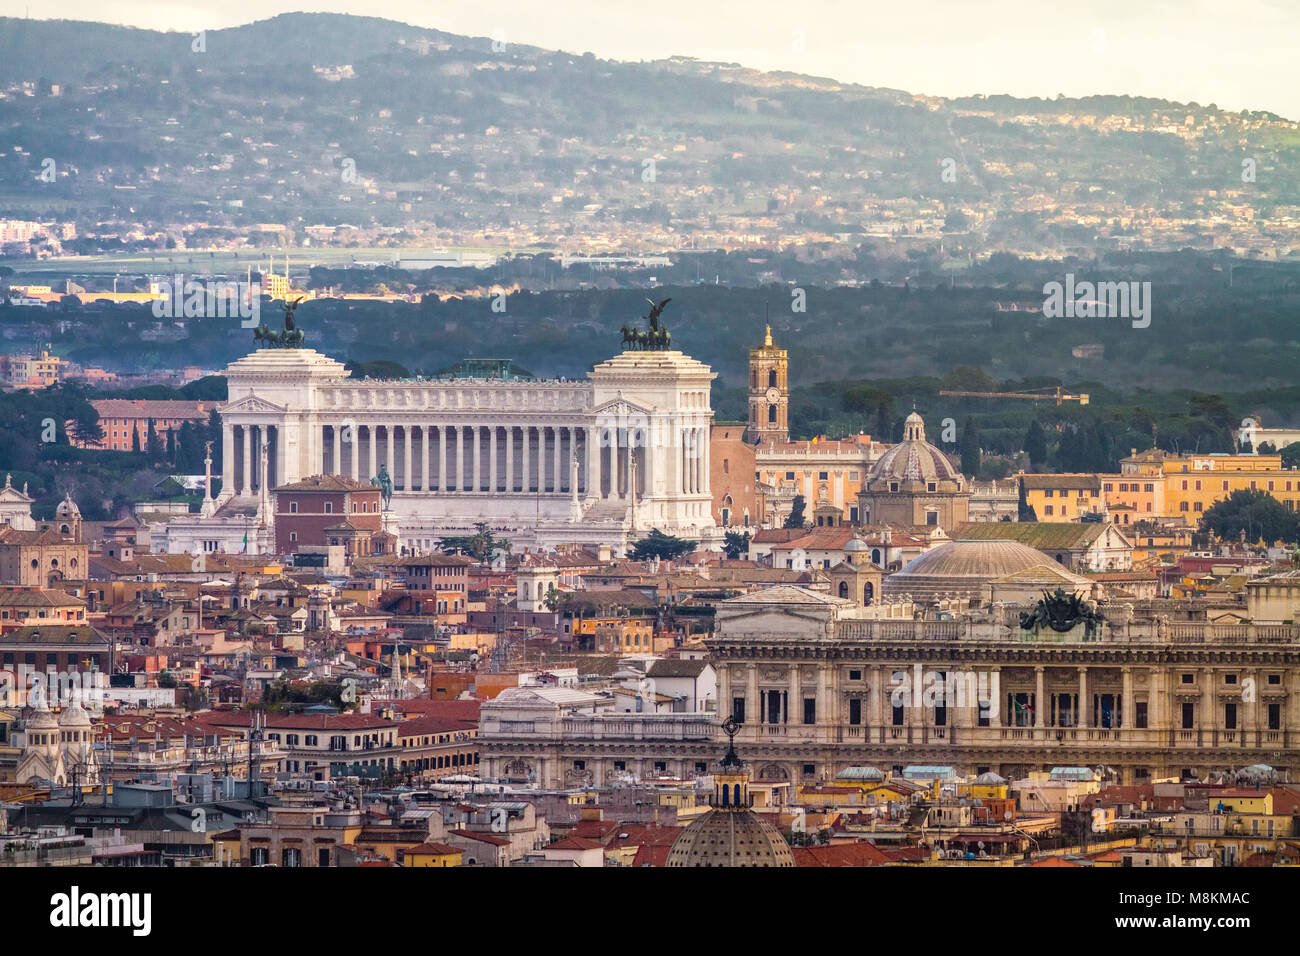 View of Rome and the VIttoriano from afar after moody rainy weather Stock Photo